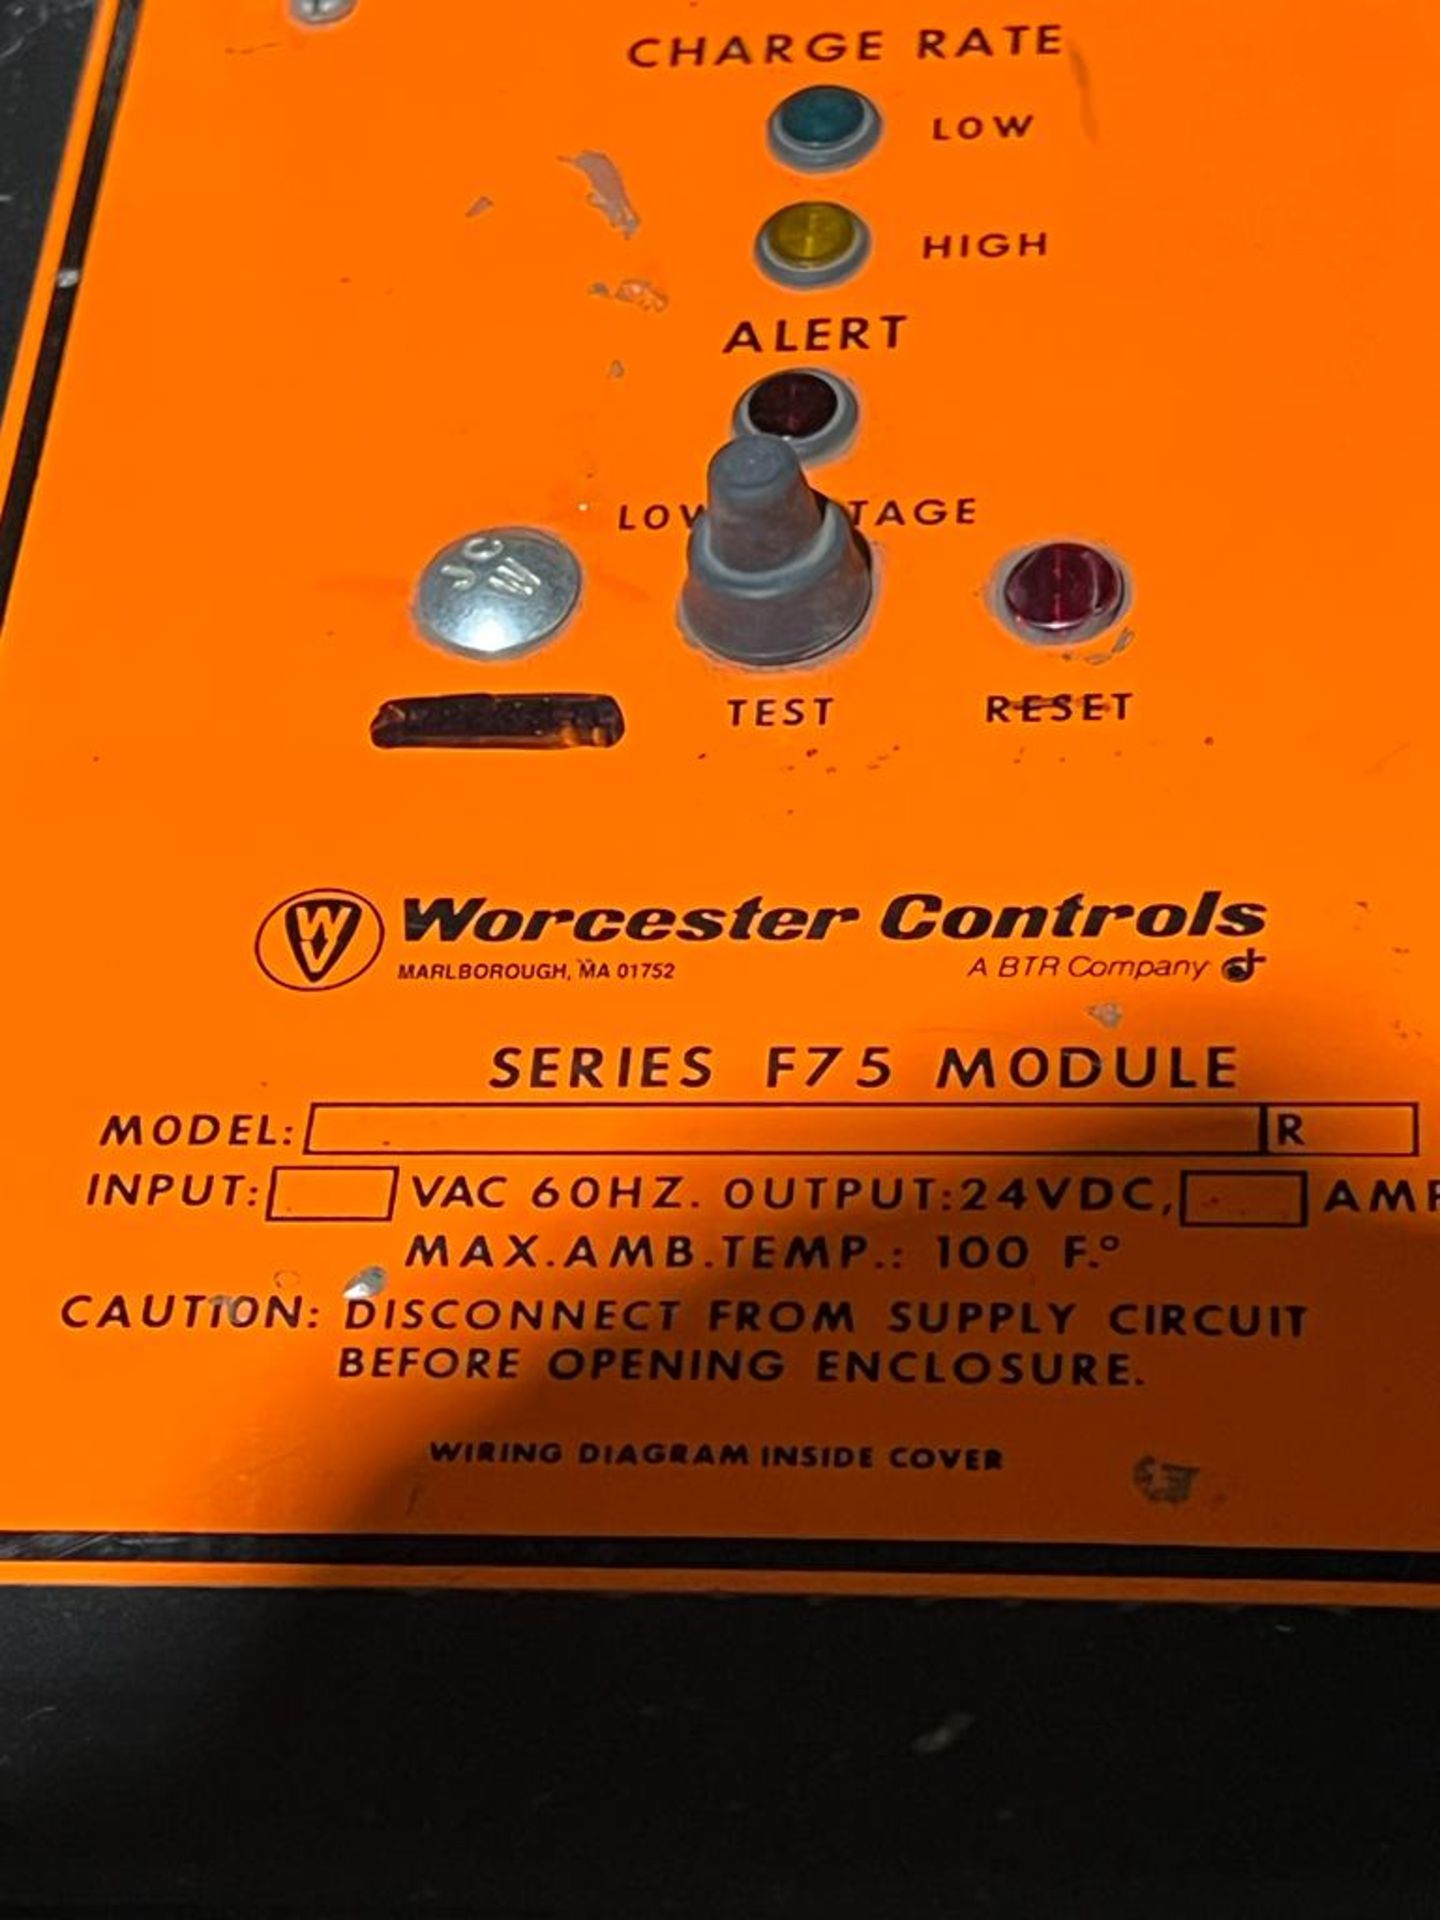 Lot of 5 (5 units) Misc Controllers - Worcester Controls, Veeder Root, Medar 500S, MB Dynamics - Image 5 of 5